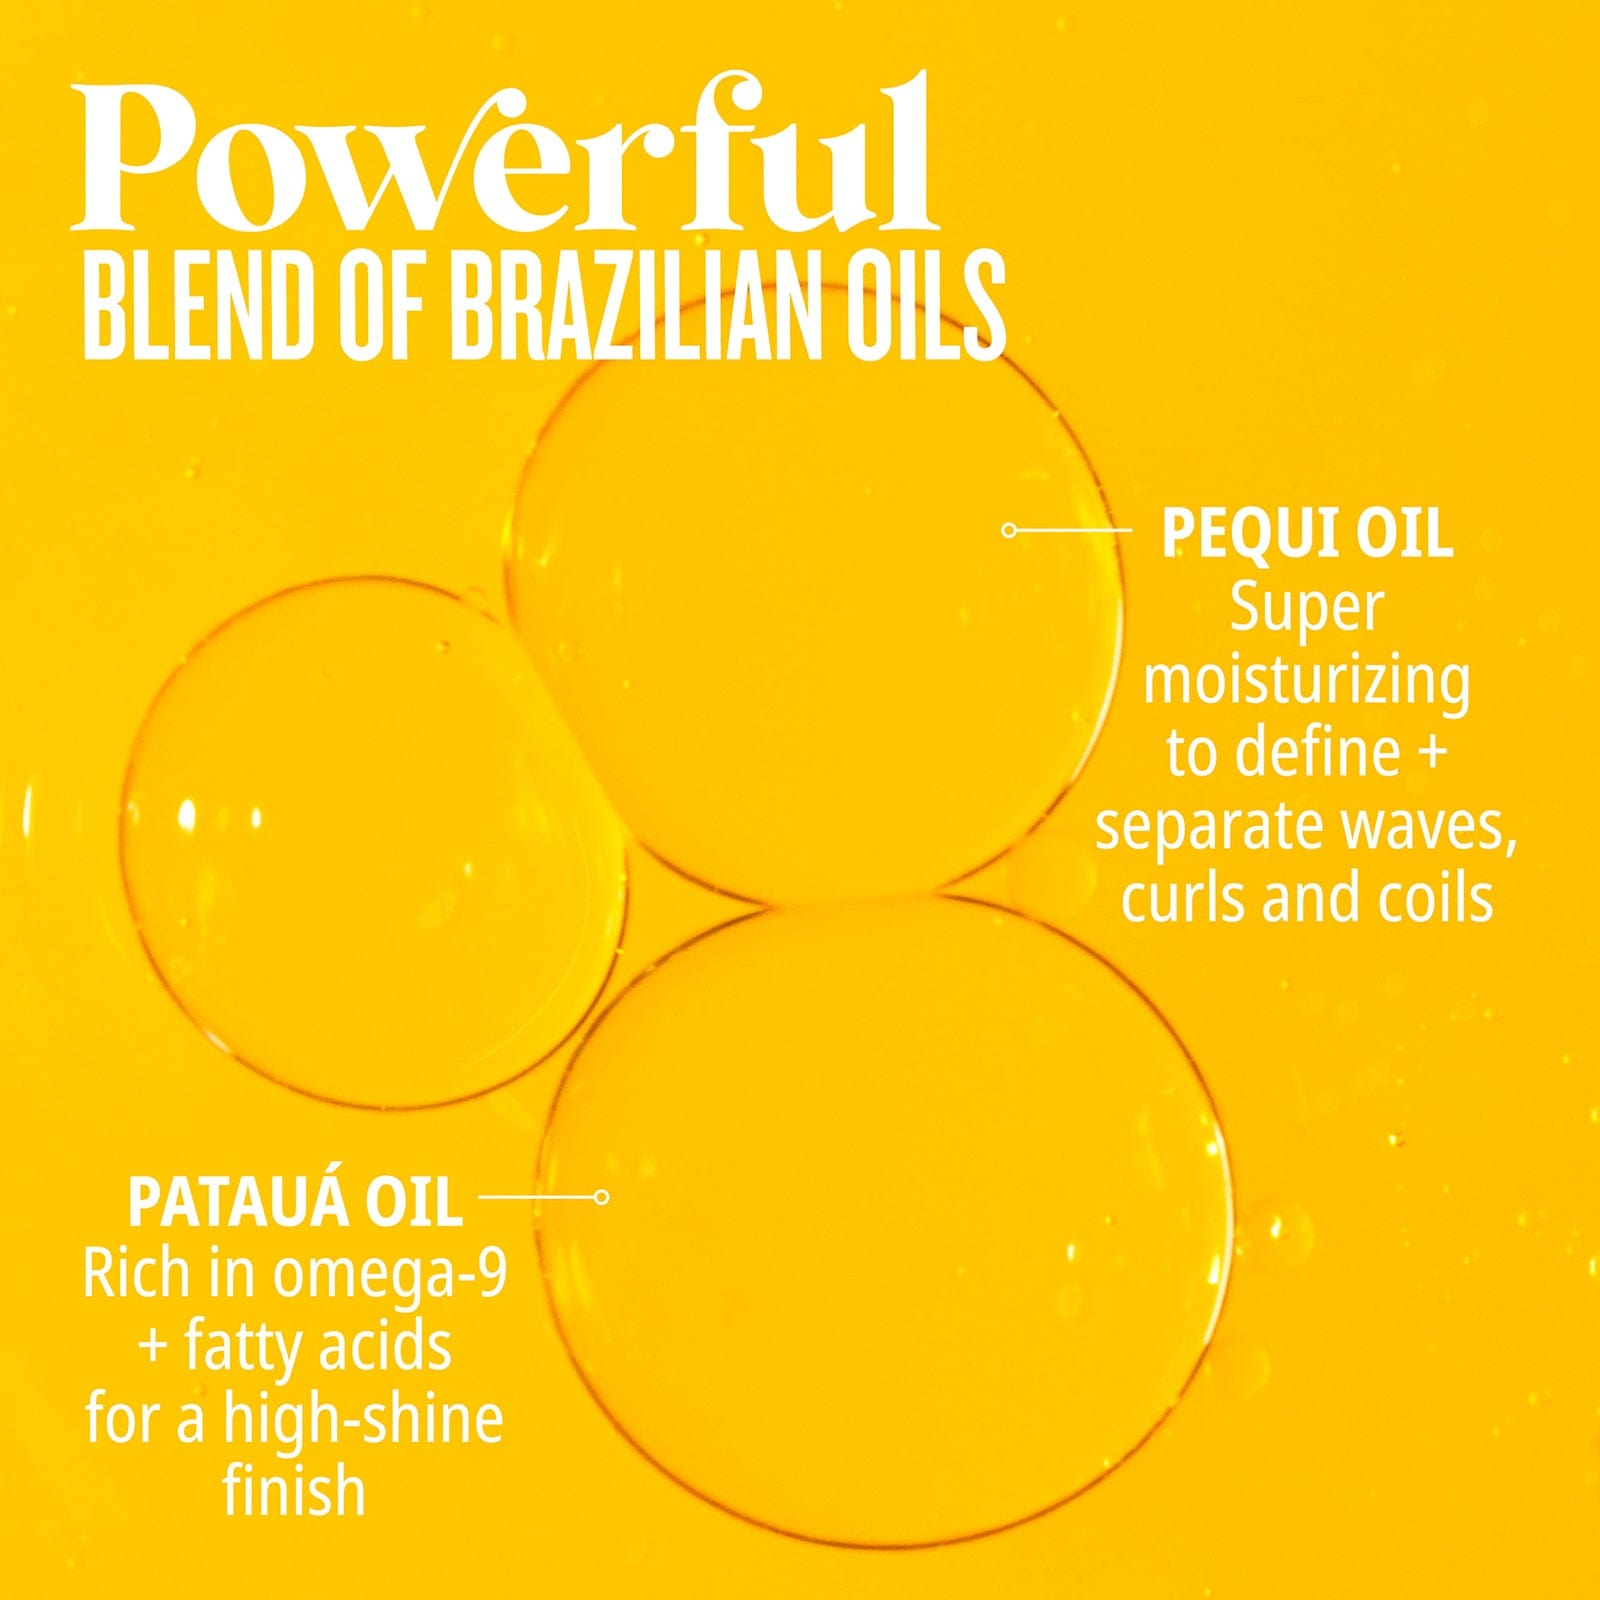 Powerful Blend of Brazilian oils | Pequi oil: super moisturizing to define + separate waves, curls &amp; coils | Patauá Oil: Rich in omega-9 + fatty acids for a high-shine finish